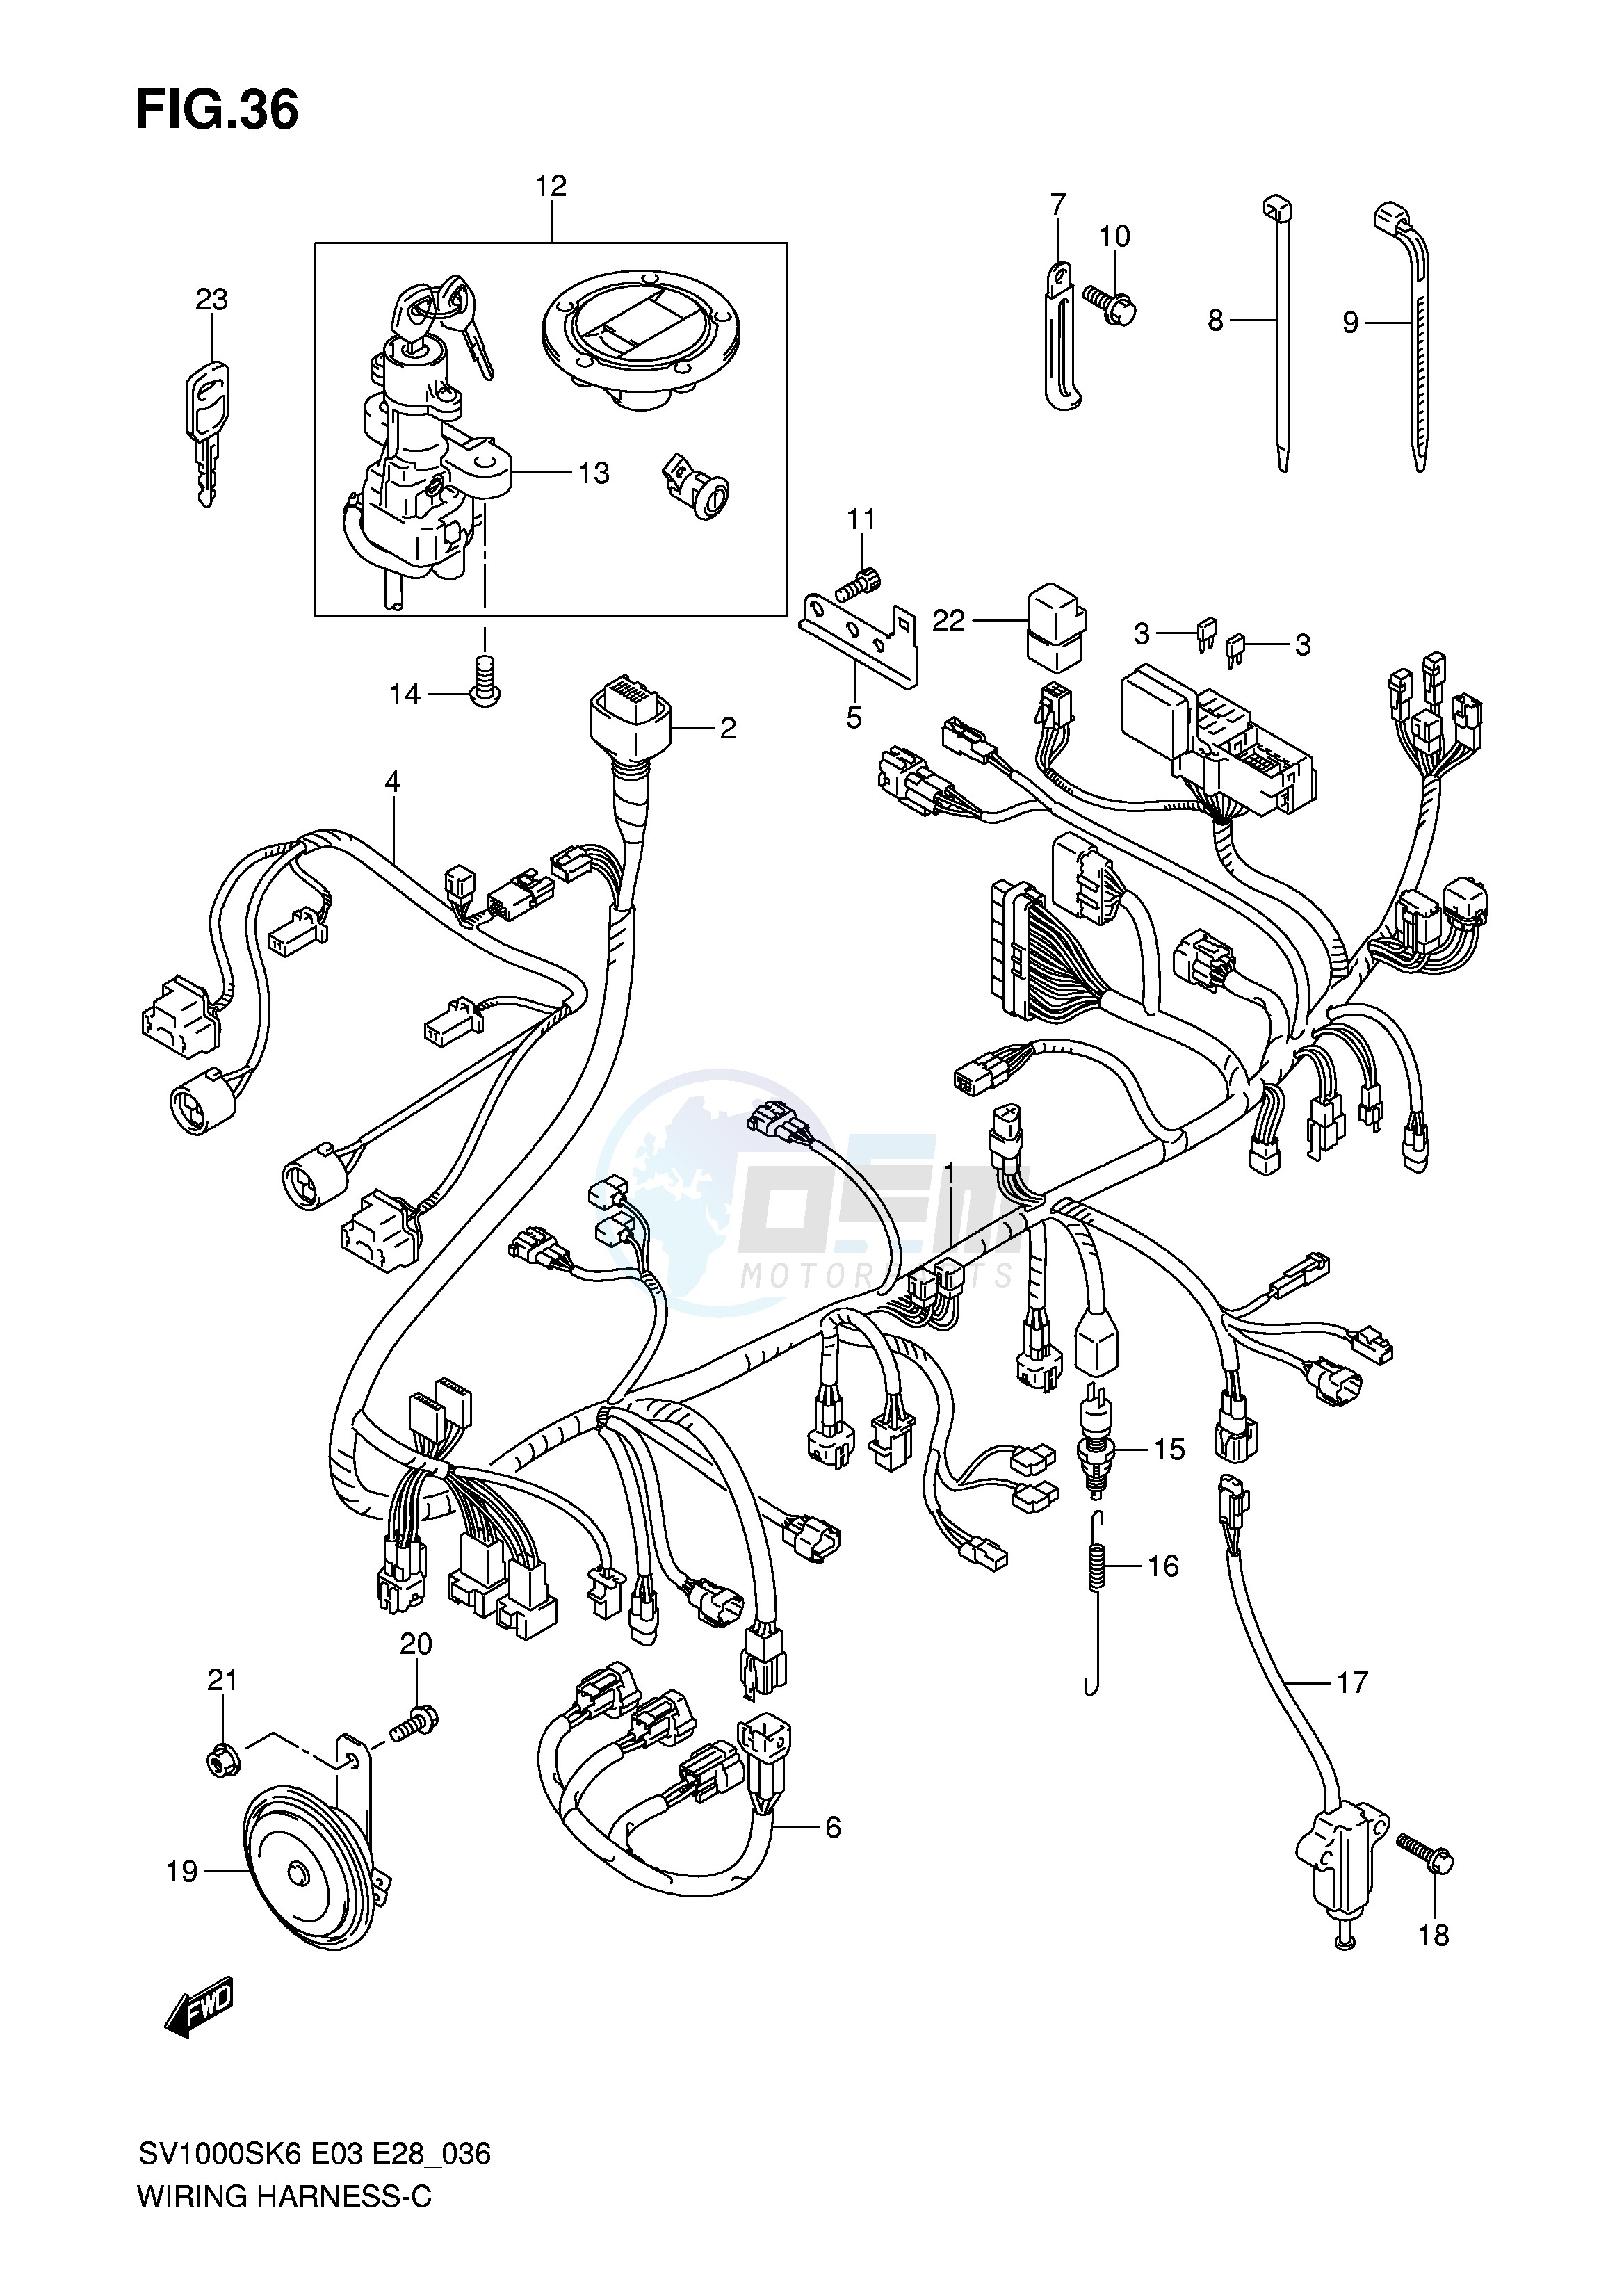 WIRING HARNESS (SV1000S) image